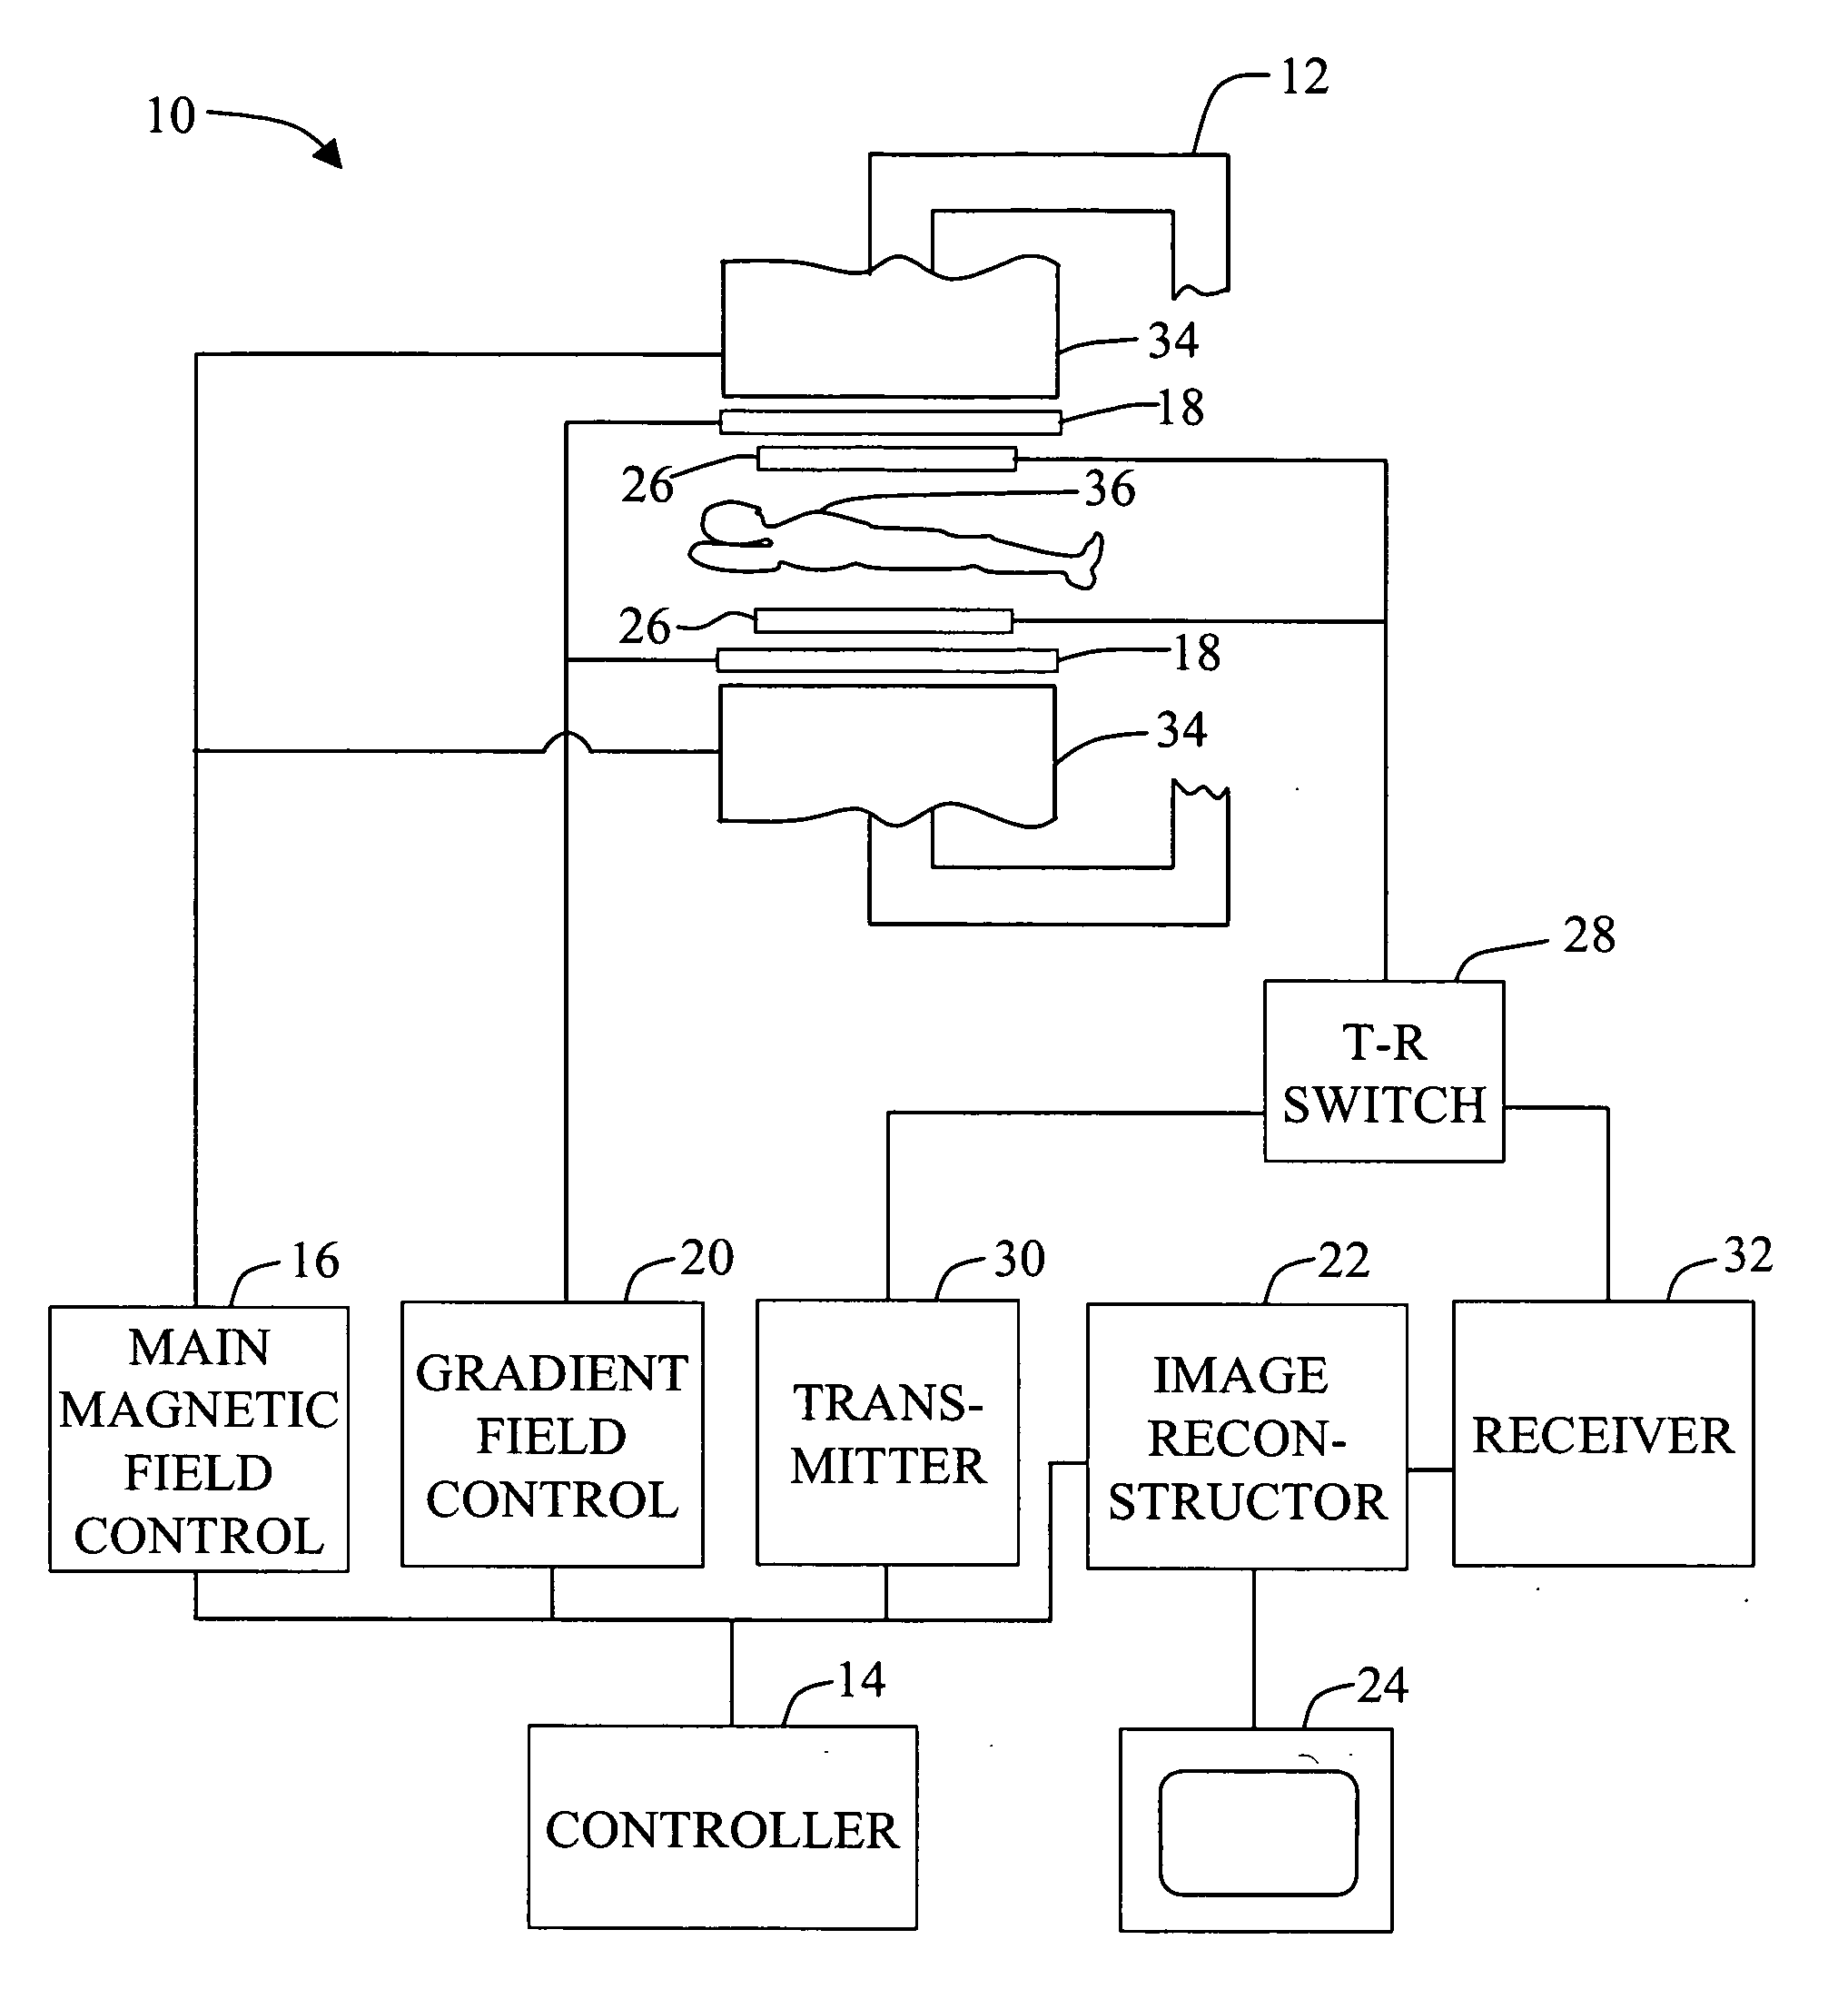 Systems and methods for calibrating coil sensitivity profiles